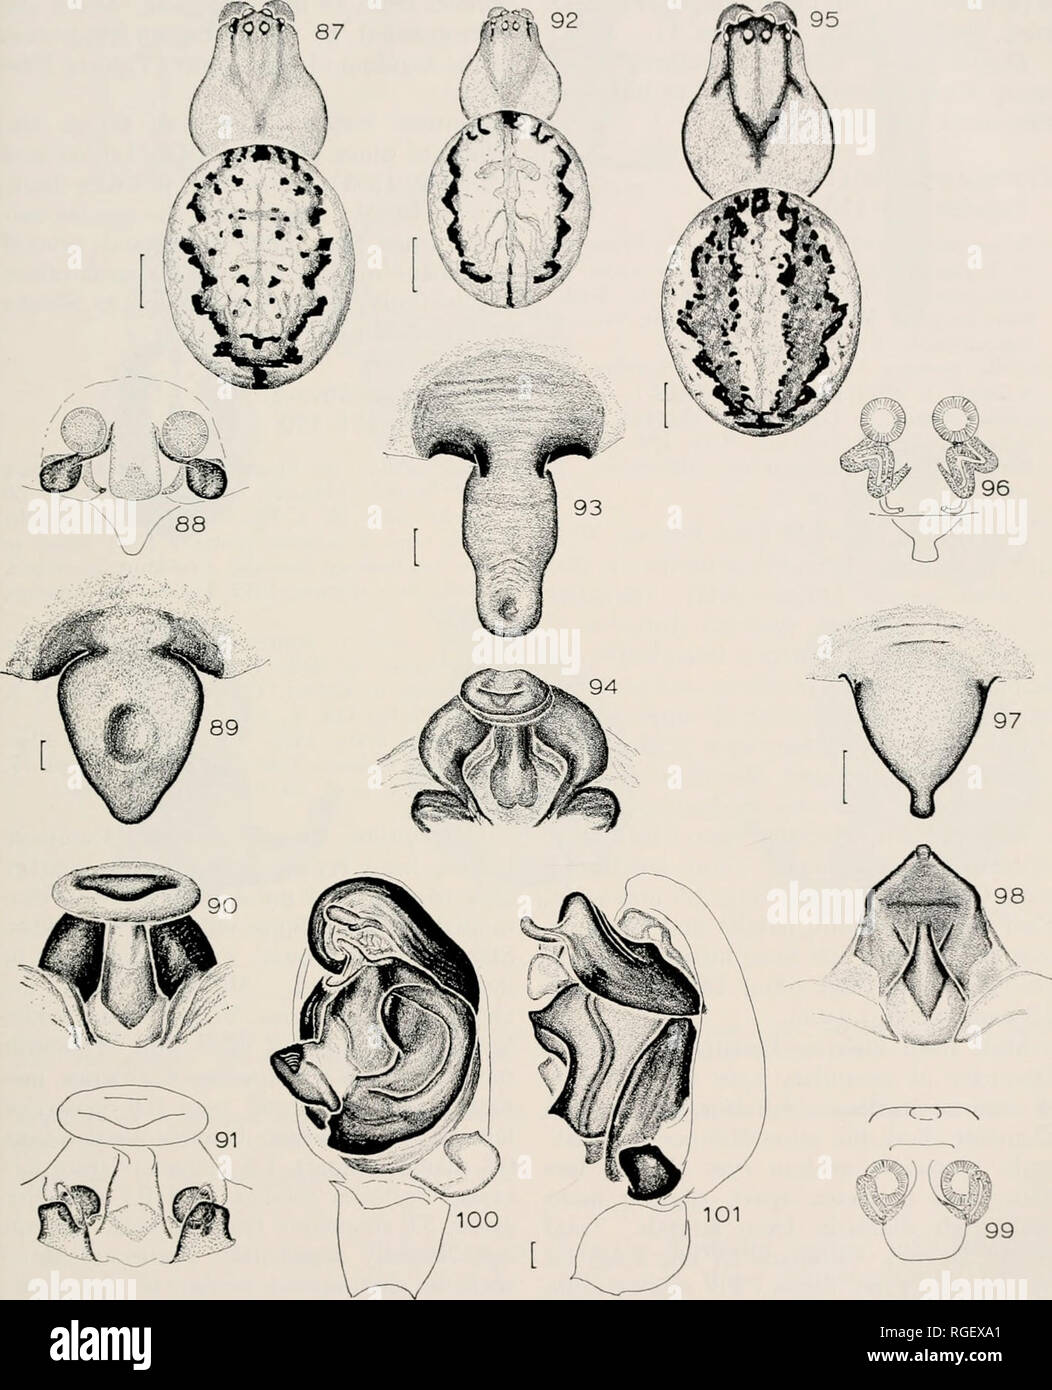 . Bulletin of the Museum of Comparative Zoology at Harvard College. Zoology. Ohb-weaver Genus Zygiella • Levi 285. Figures 87 91. Zygiella kochi {ThoreW). 87. Female. 88 91. Epigynum. 88. Dorsal, cleared. 89. Ventral. 90. Posterior. 91. Posterior, cleared. Figures 92-94. Z. inconveniens (O. P.-Cambridge). 92. Female. 93, 94. Epigynum. 93. Ventral. 94. Posterior. Figures 95 101. Z. thorelli {Ausserer). 95. Female. 96 99. Epigynum. 96. Dorsal, cleared. 97. Ventral. 98. Posterior. 99. Posterior, cleared. 100, 101. Left male palpus. 100. Ventral. 101. Lateral. Scale lines. 0.1 mm except Figures 87 Stock Photo